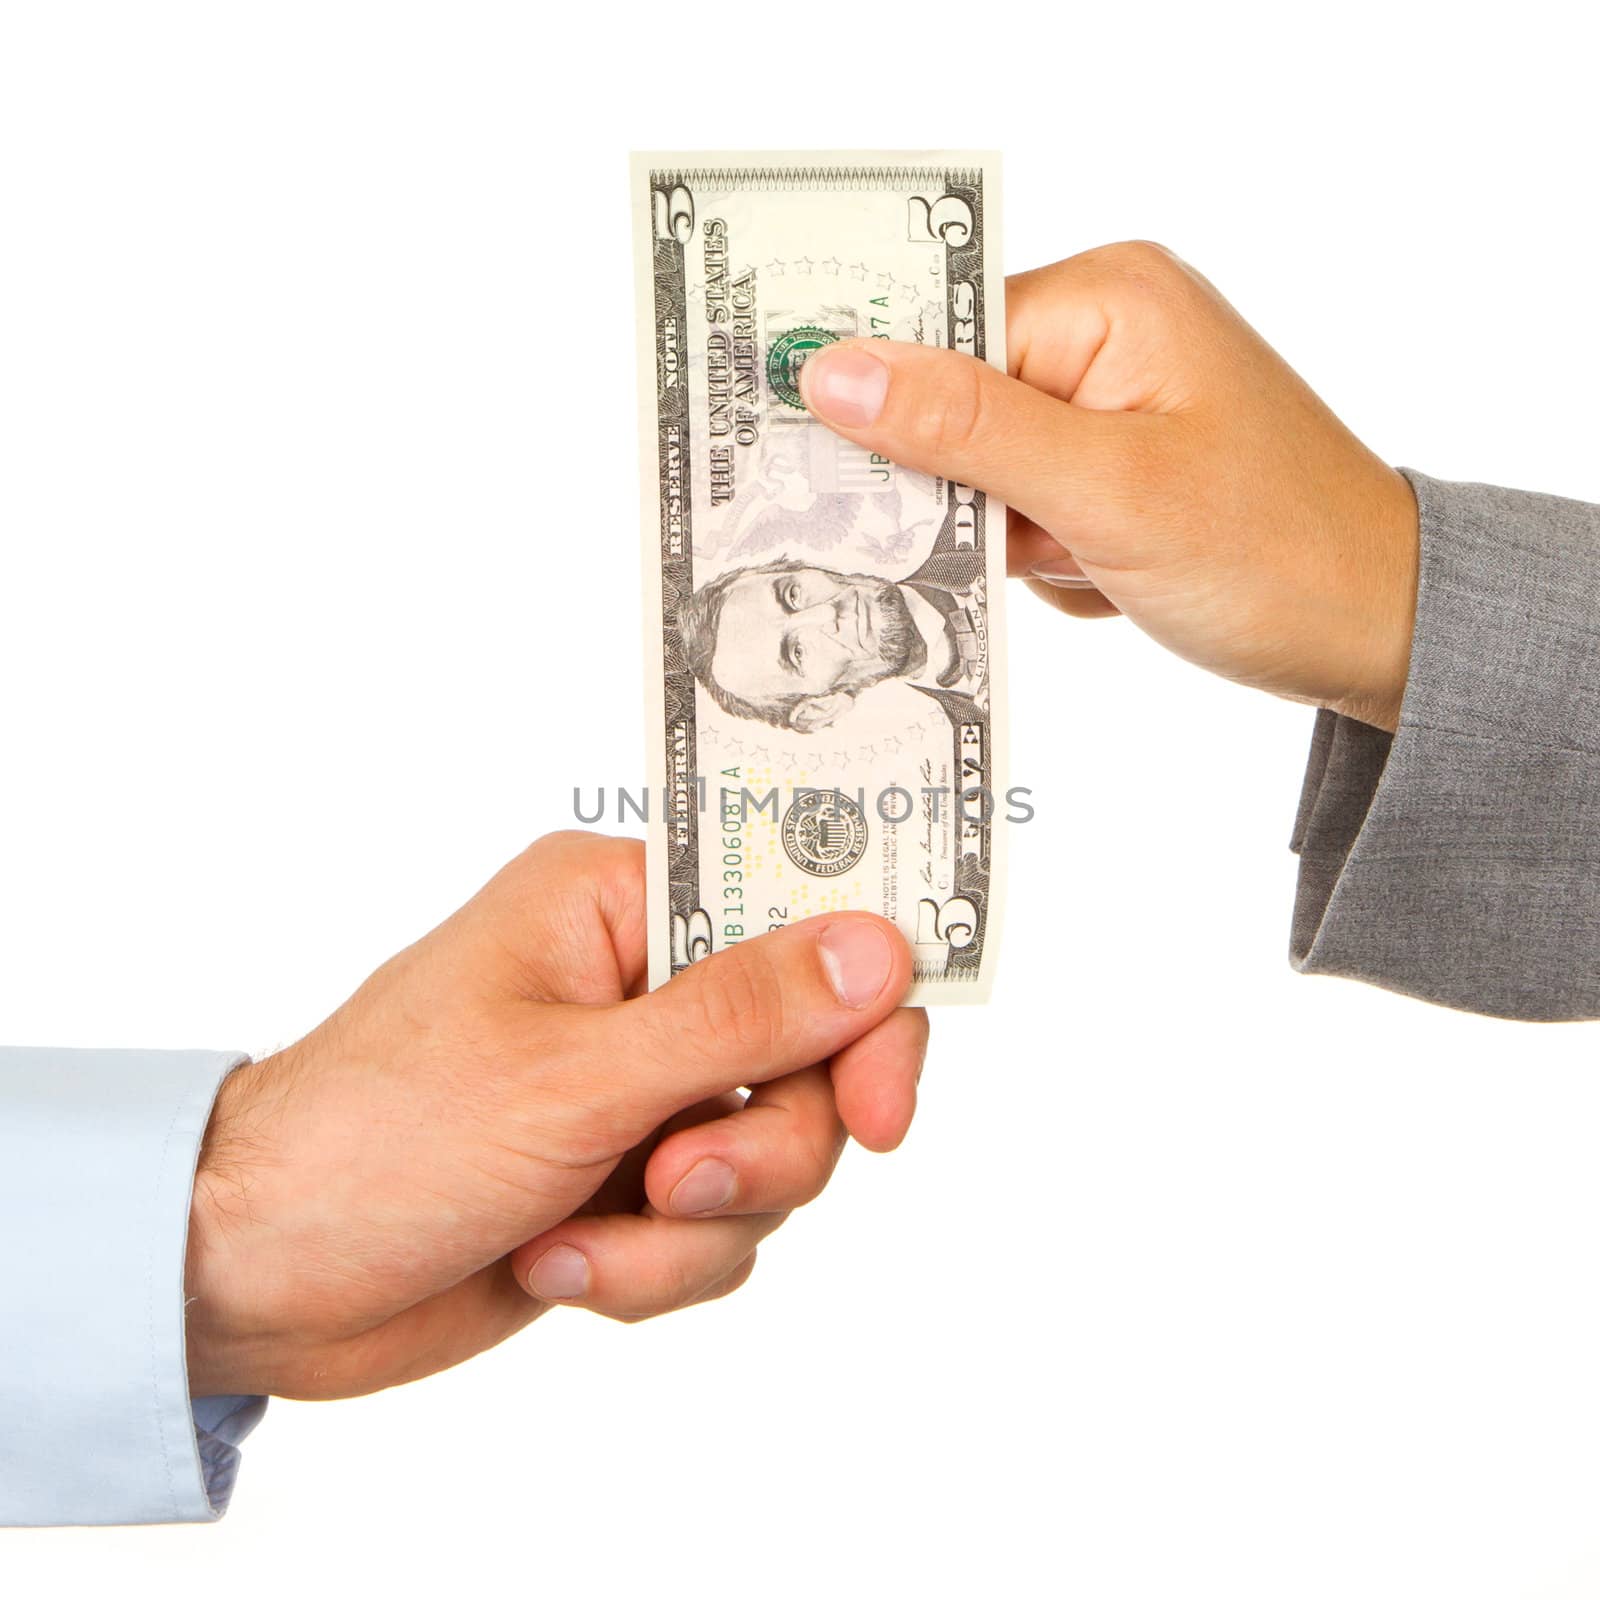 Transfer of money between man and woman, isolated on white